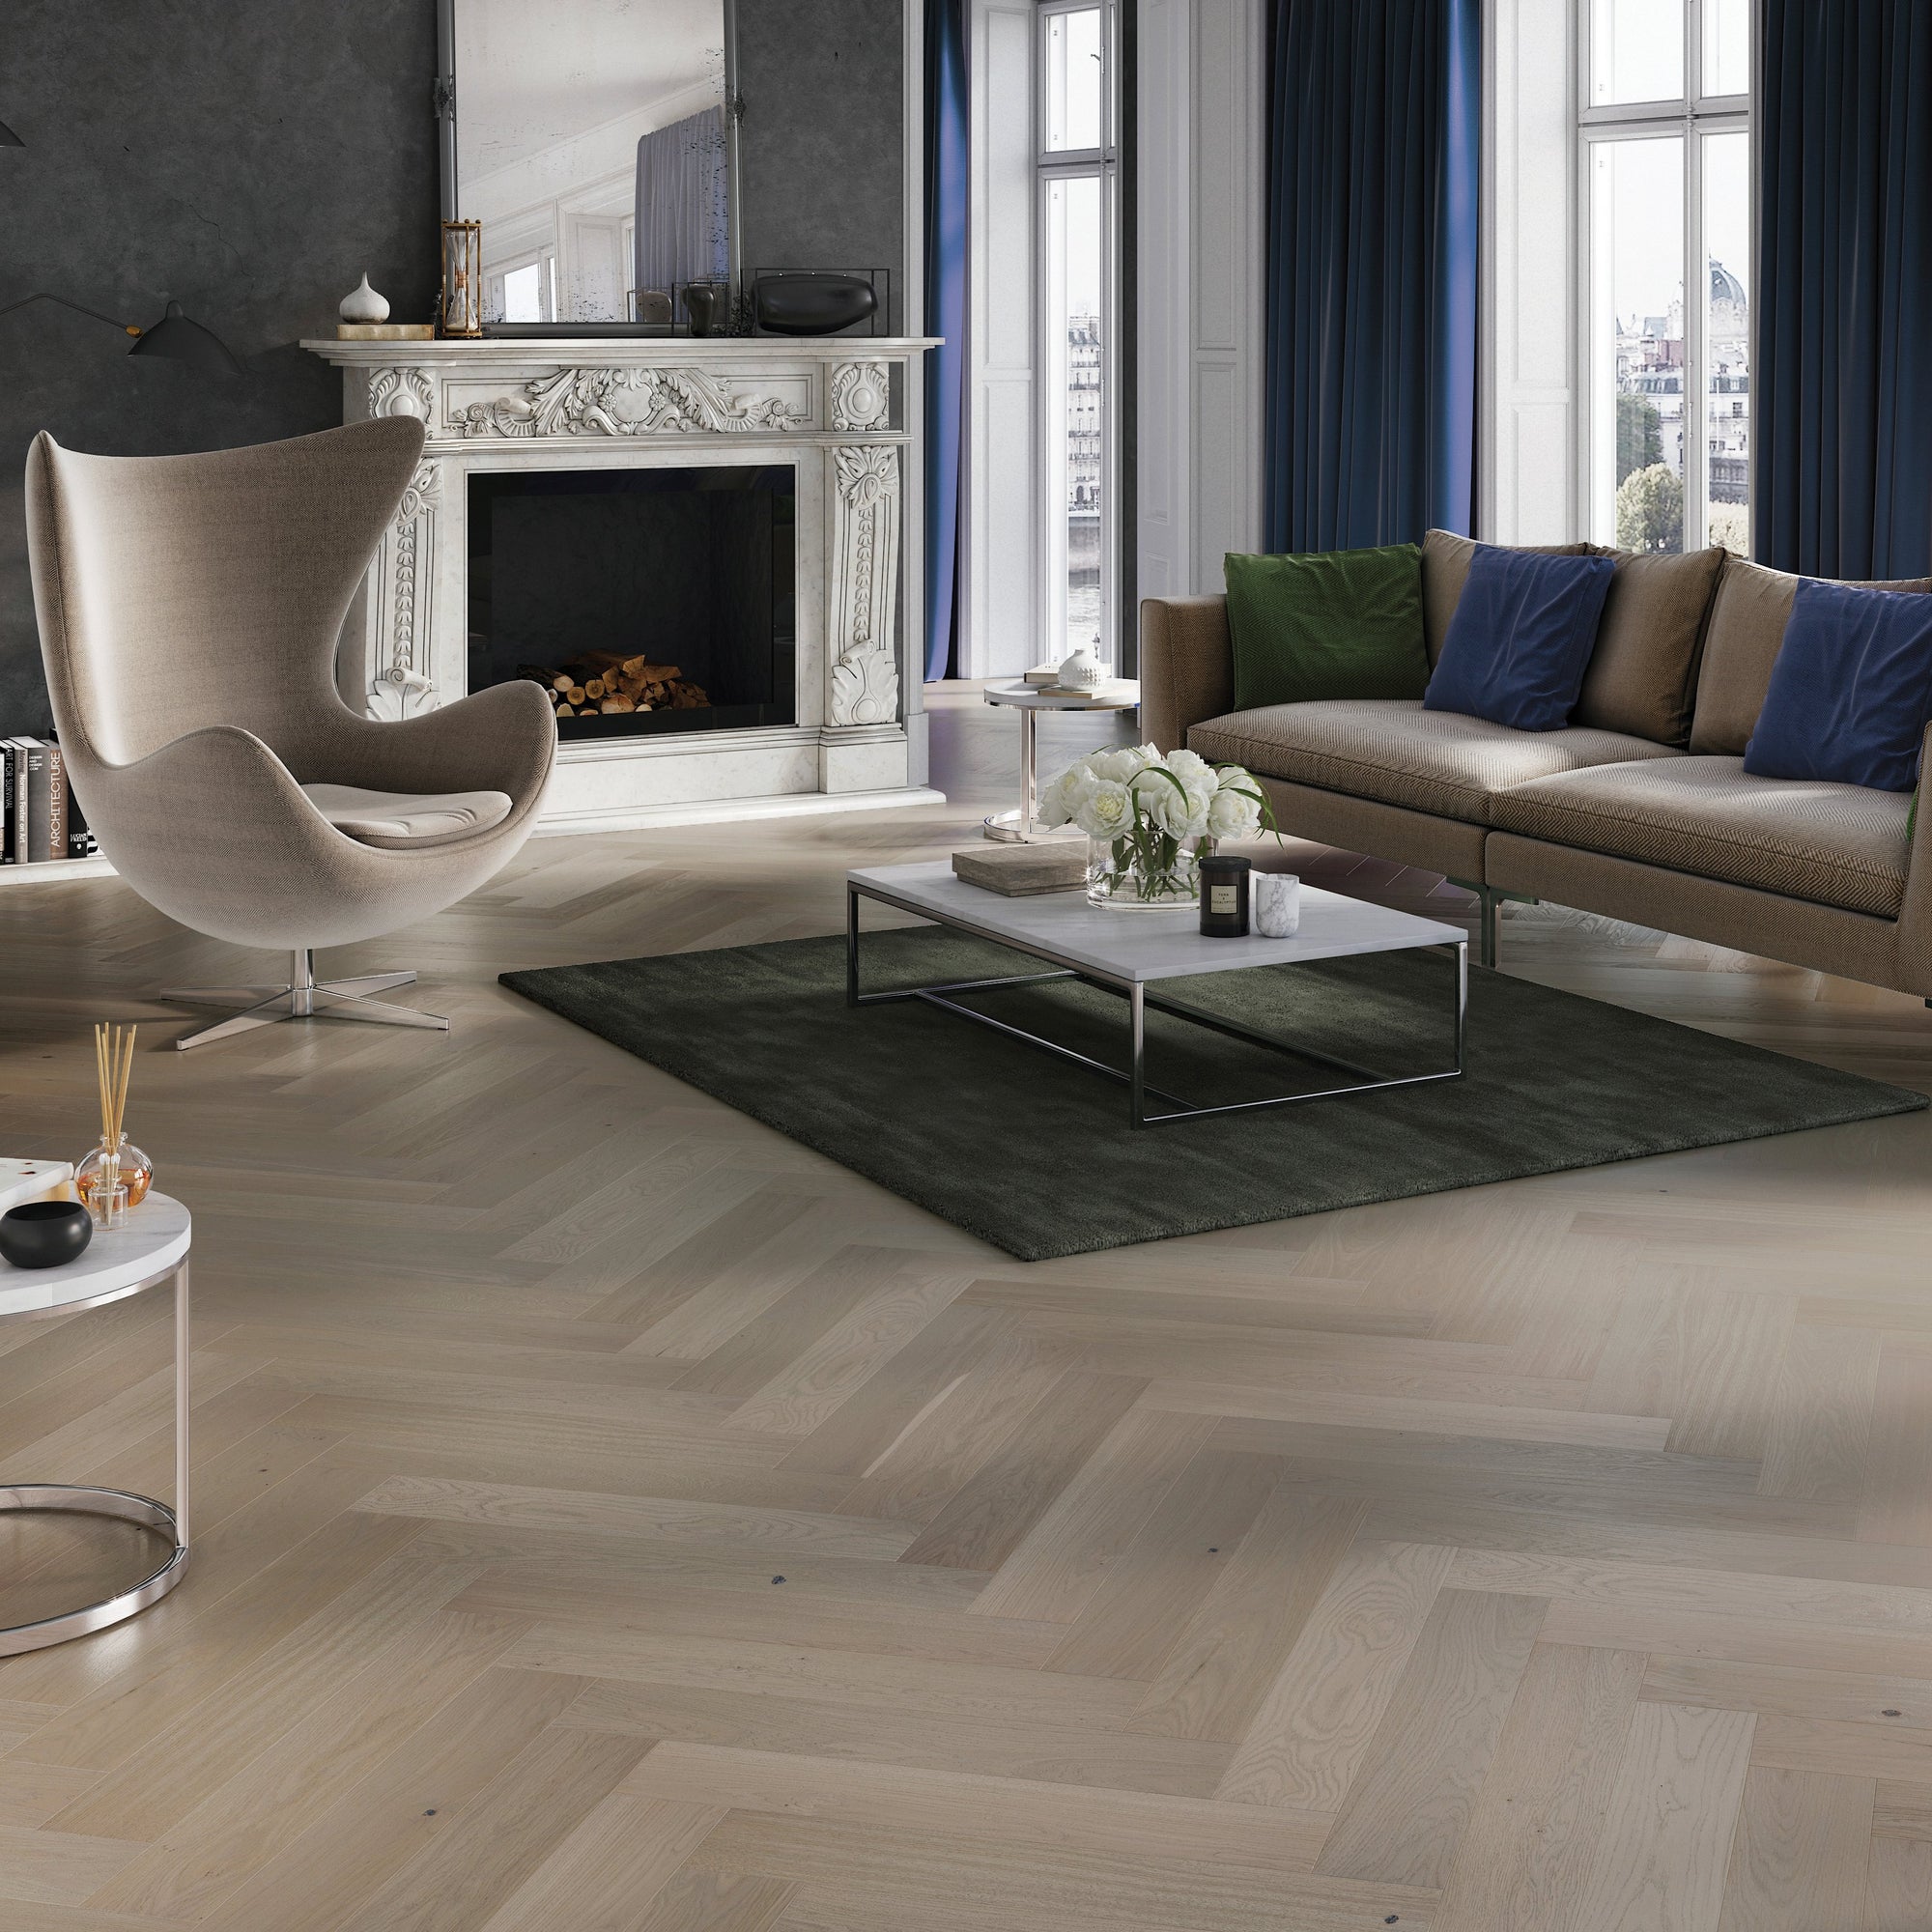 Brushed & Stained Ashton & Rose Gillow natural oak engineered hardwood flooring from our Herringbone collection